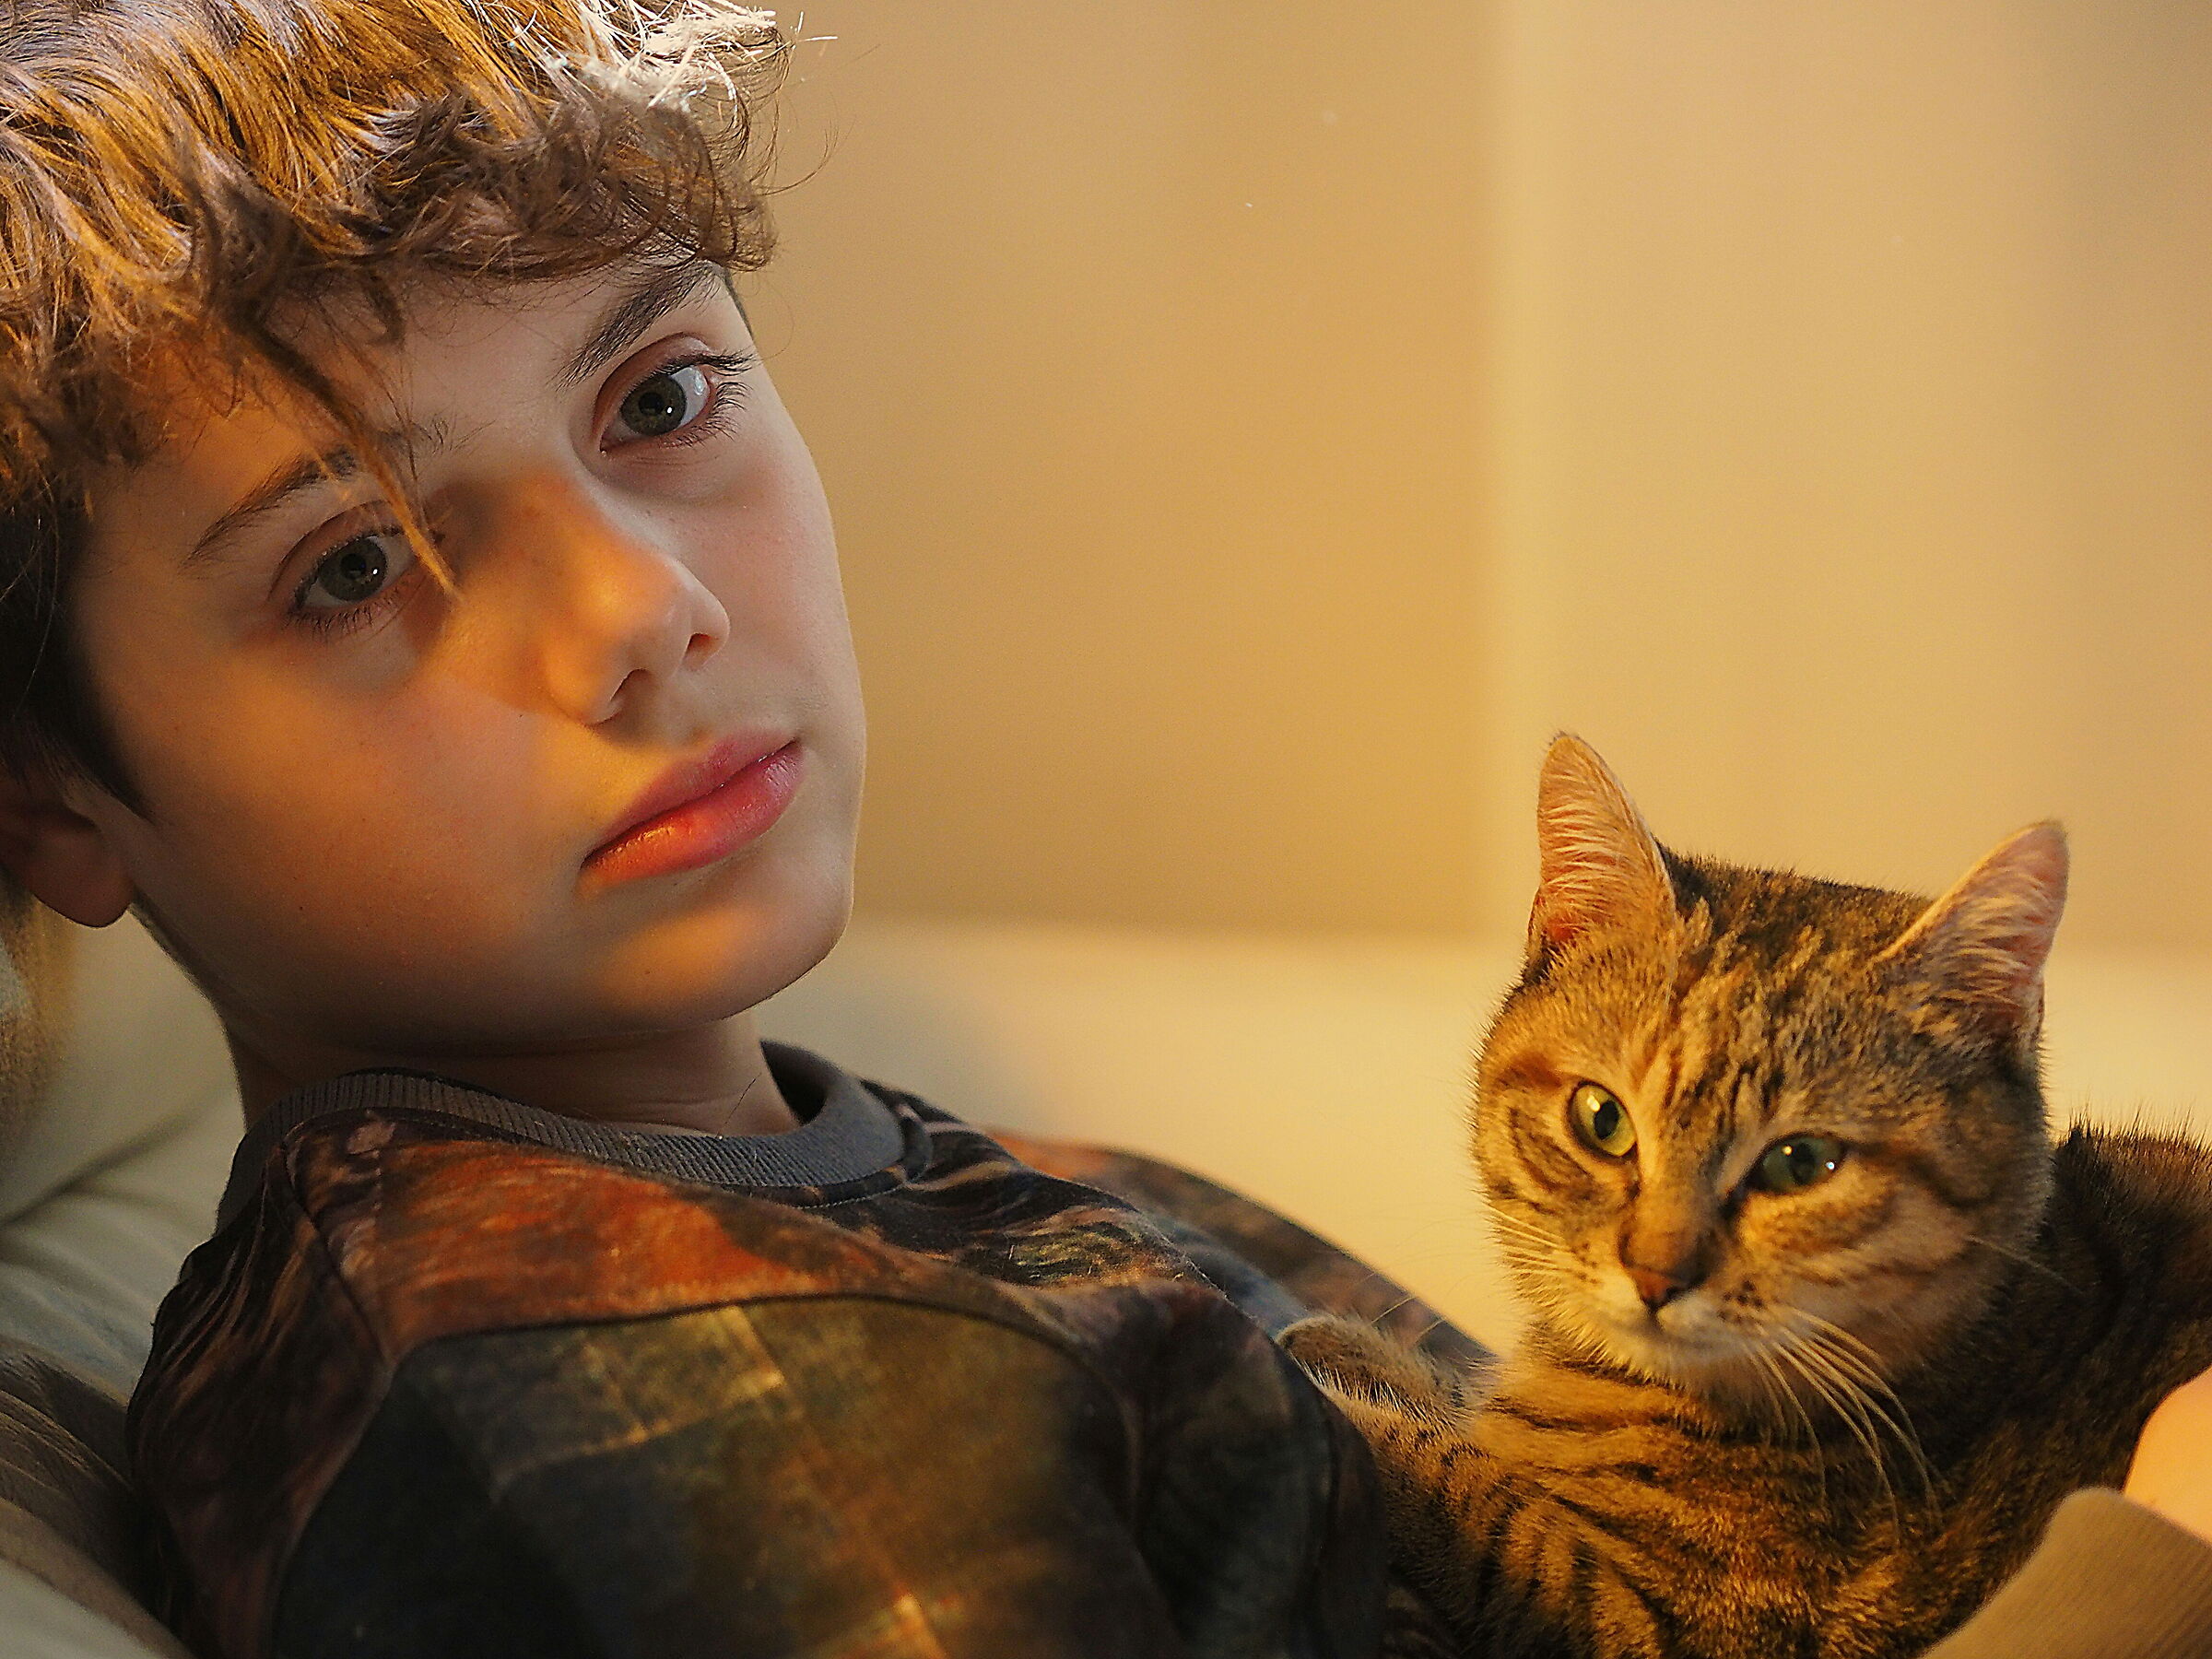 Boy with cat...